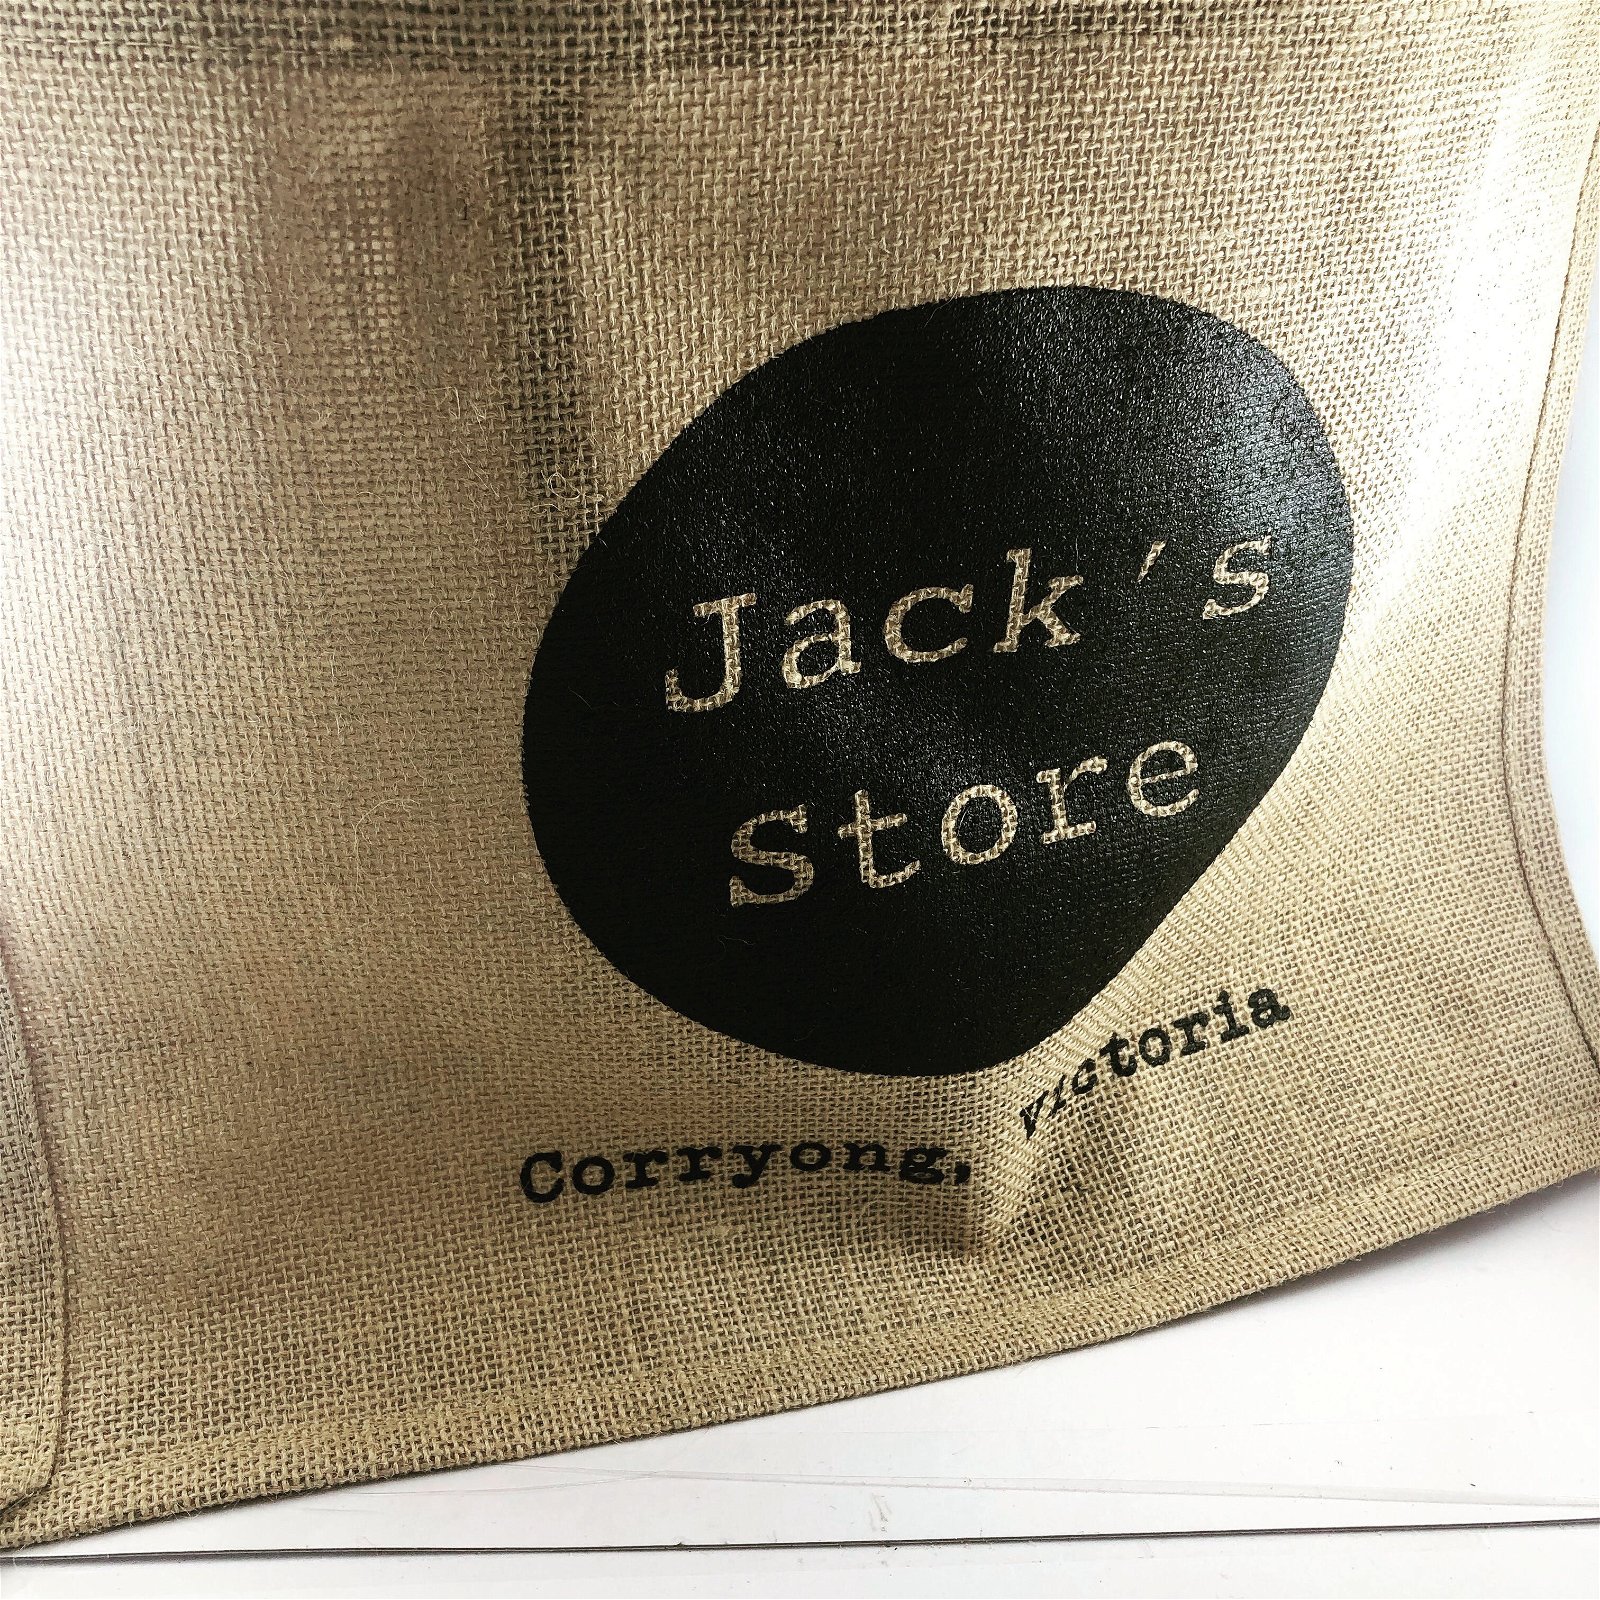 Jack's Store - Broome Tourism